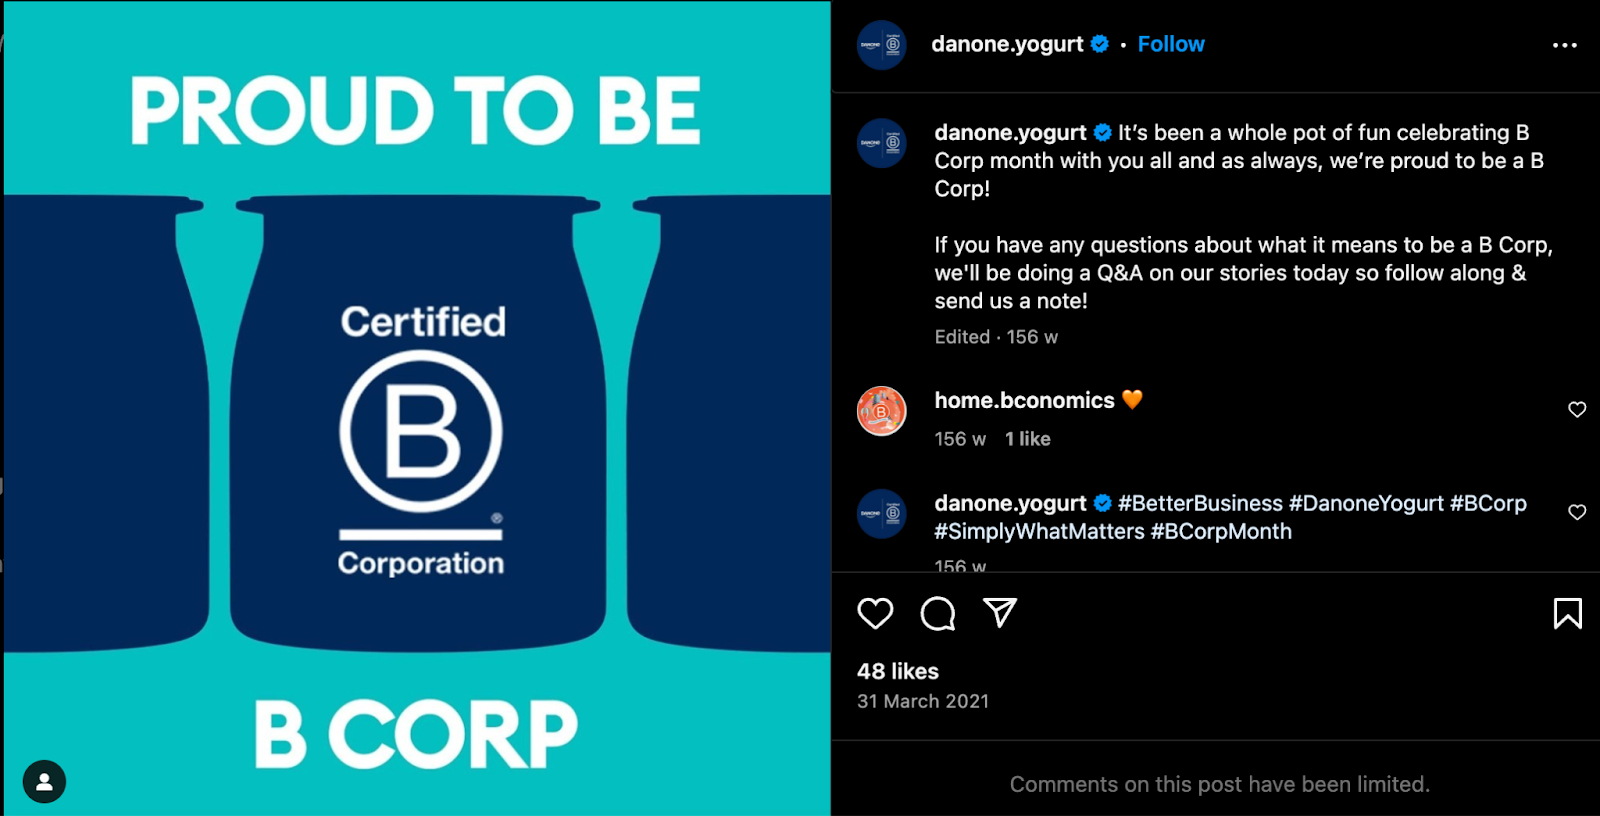 Instagram post by Danone sharing their B CORP certification